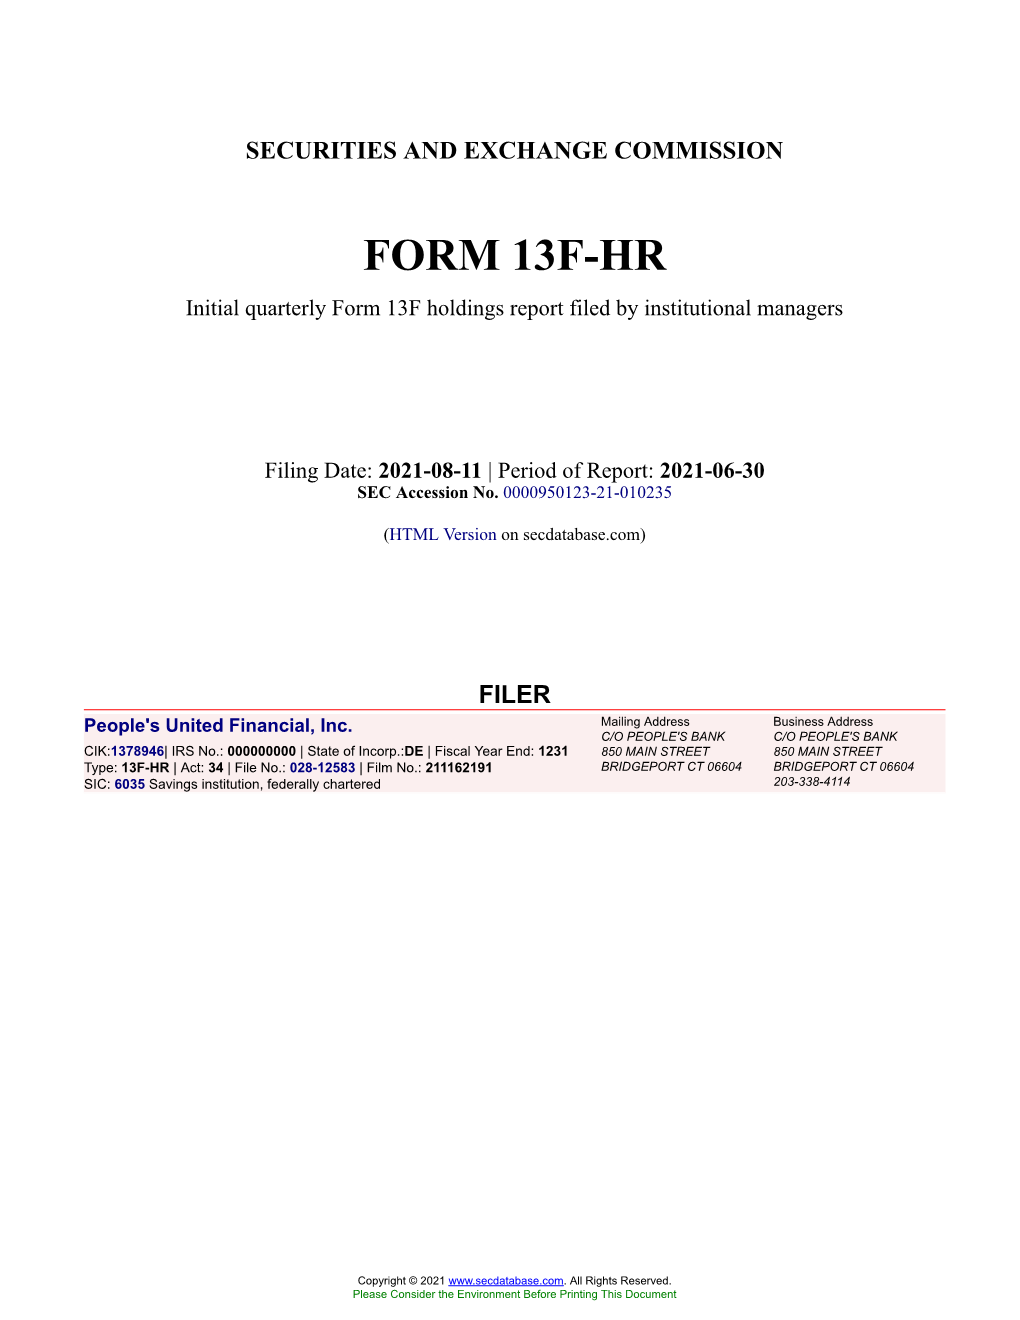 People's United Financial, Inc. Form 13F-HR Filed 2021-08-11